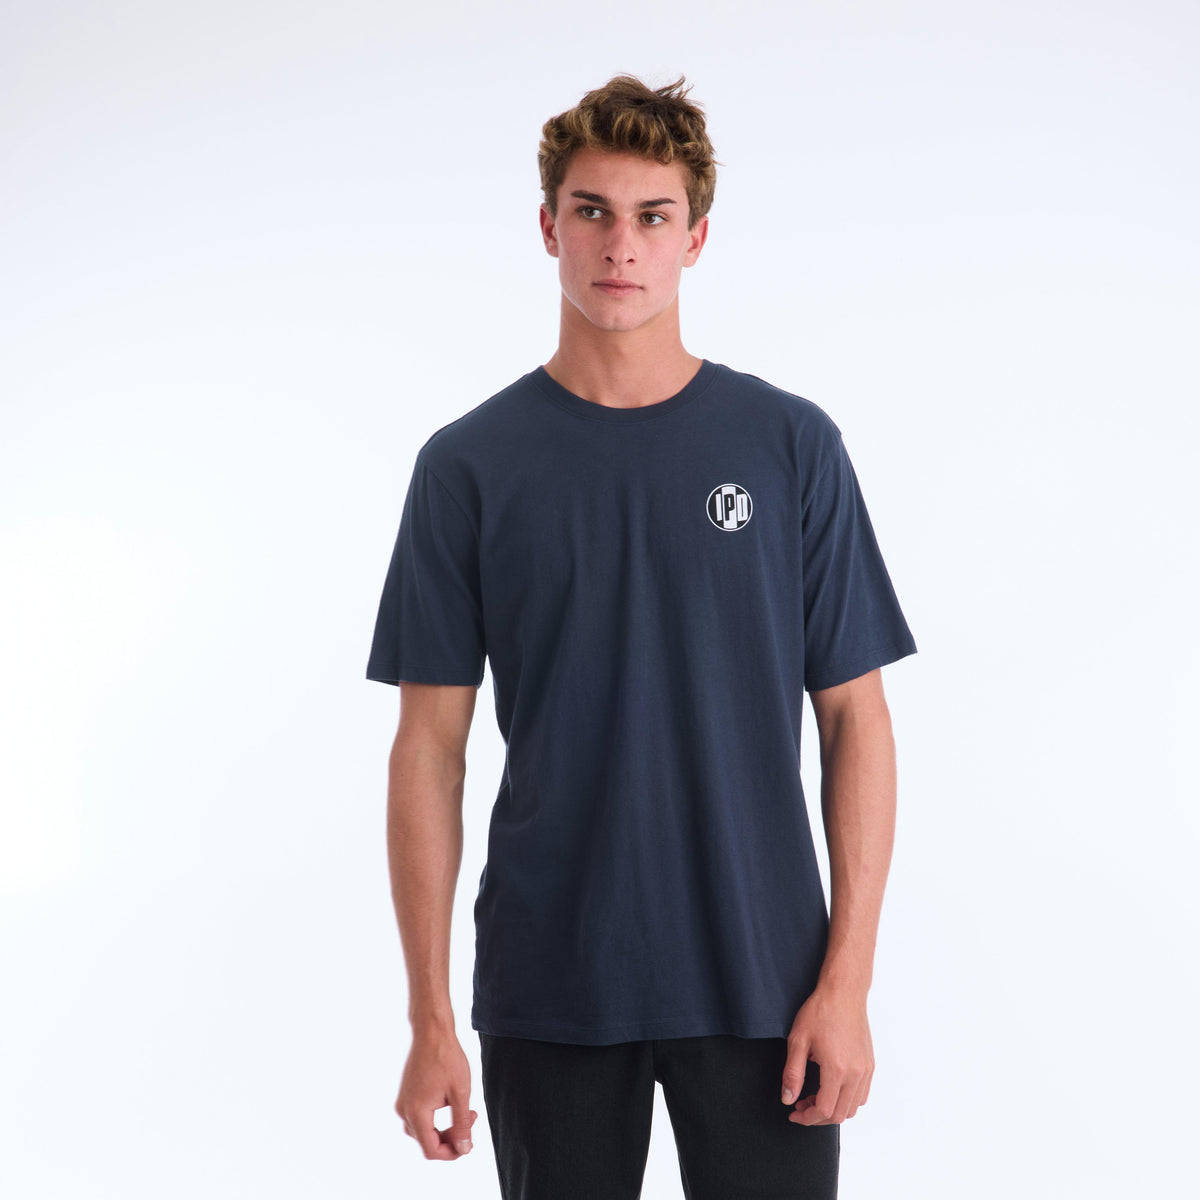 The Surf Shop Super Soft Tee has a left chest front graphic of the IPD logo in black and light blue. The back pictures a hand-drawn depiction of a surf shop across the upper middle back of the shirt. The body color of the shirt is navy and the graphic color is multicolored and has a small black side seam label with the IPD logo.